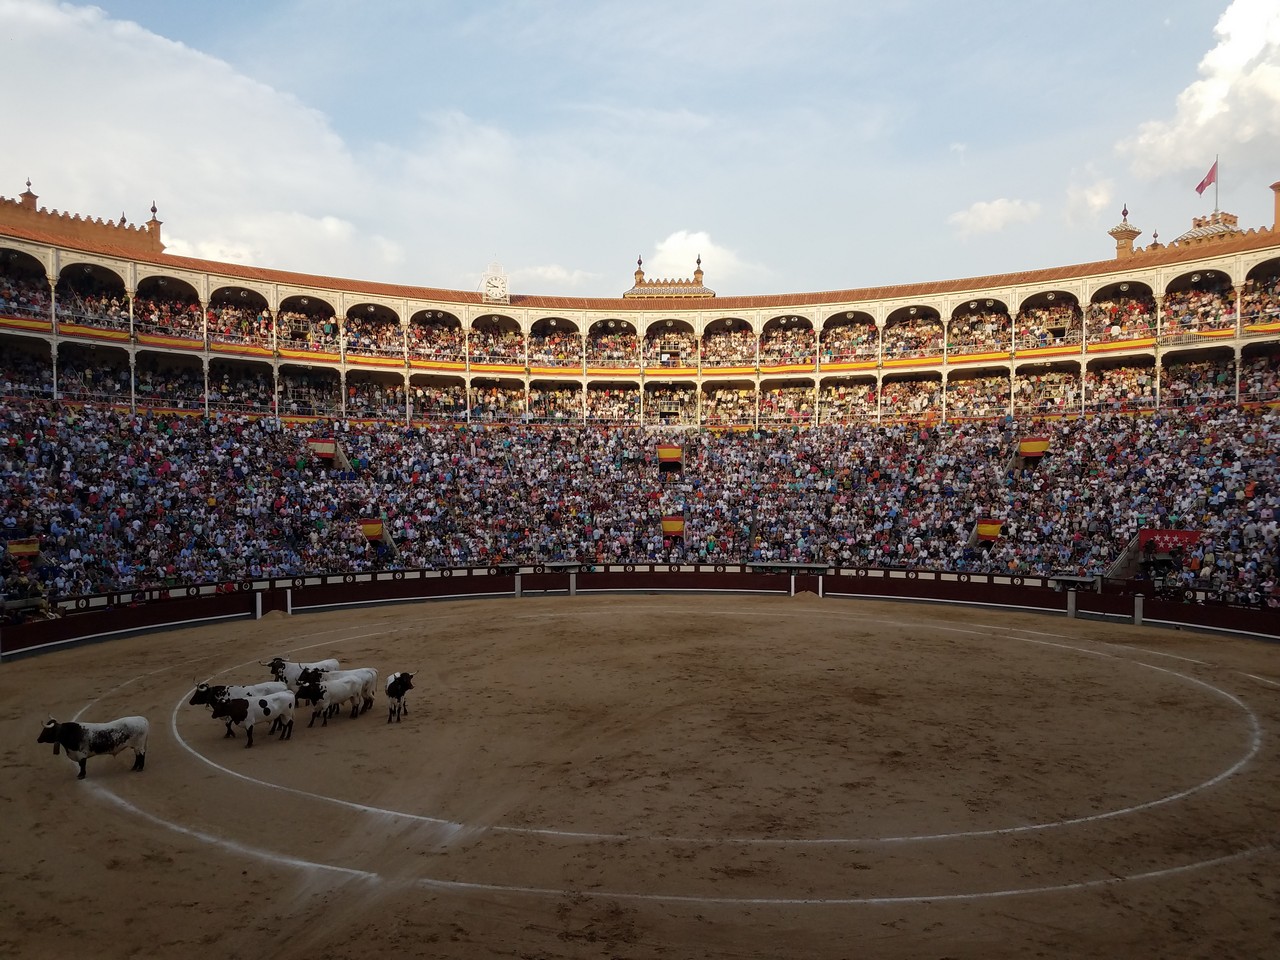 a crowd of people in a stadium with a bullring